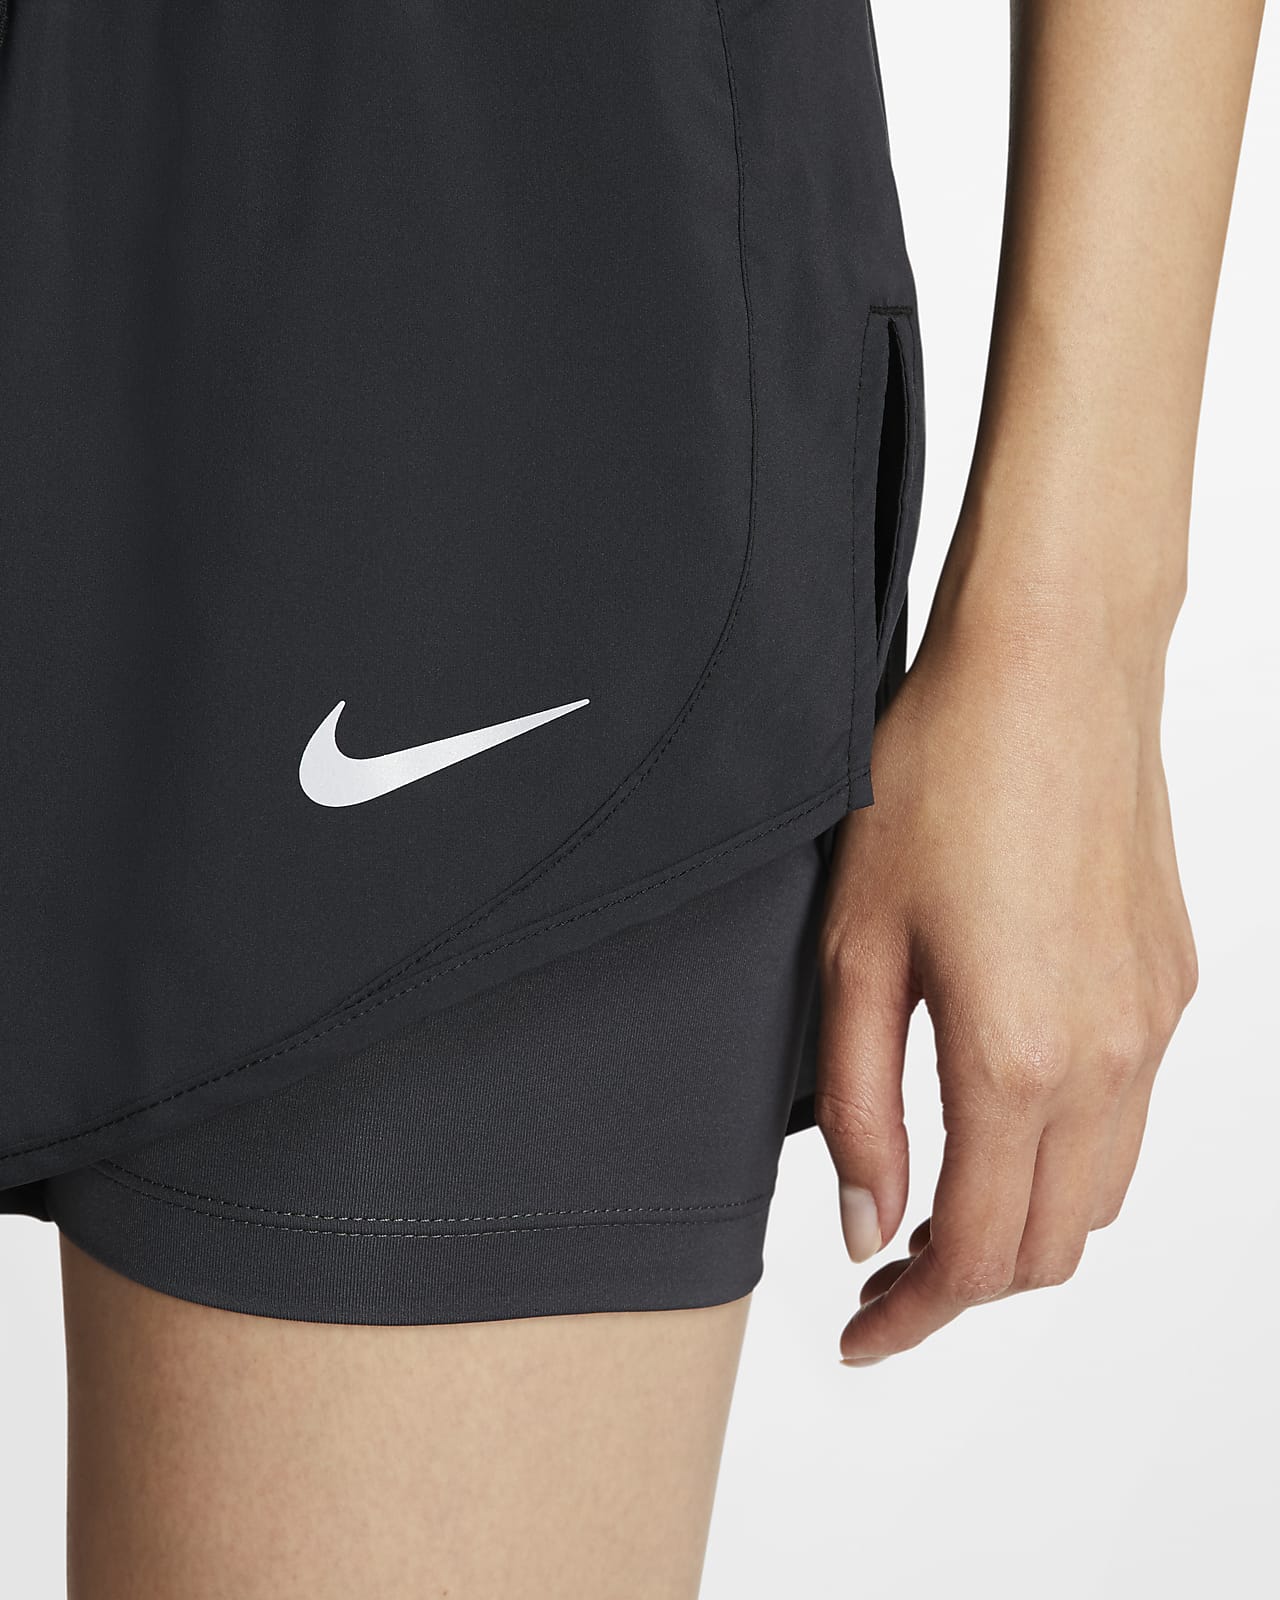 nike 2 in 1 tempo shorts